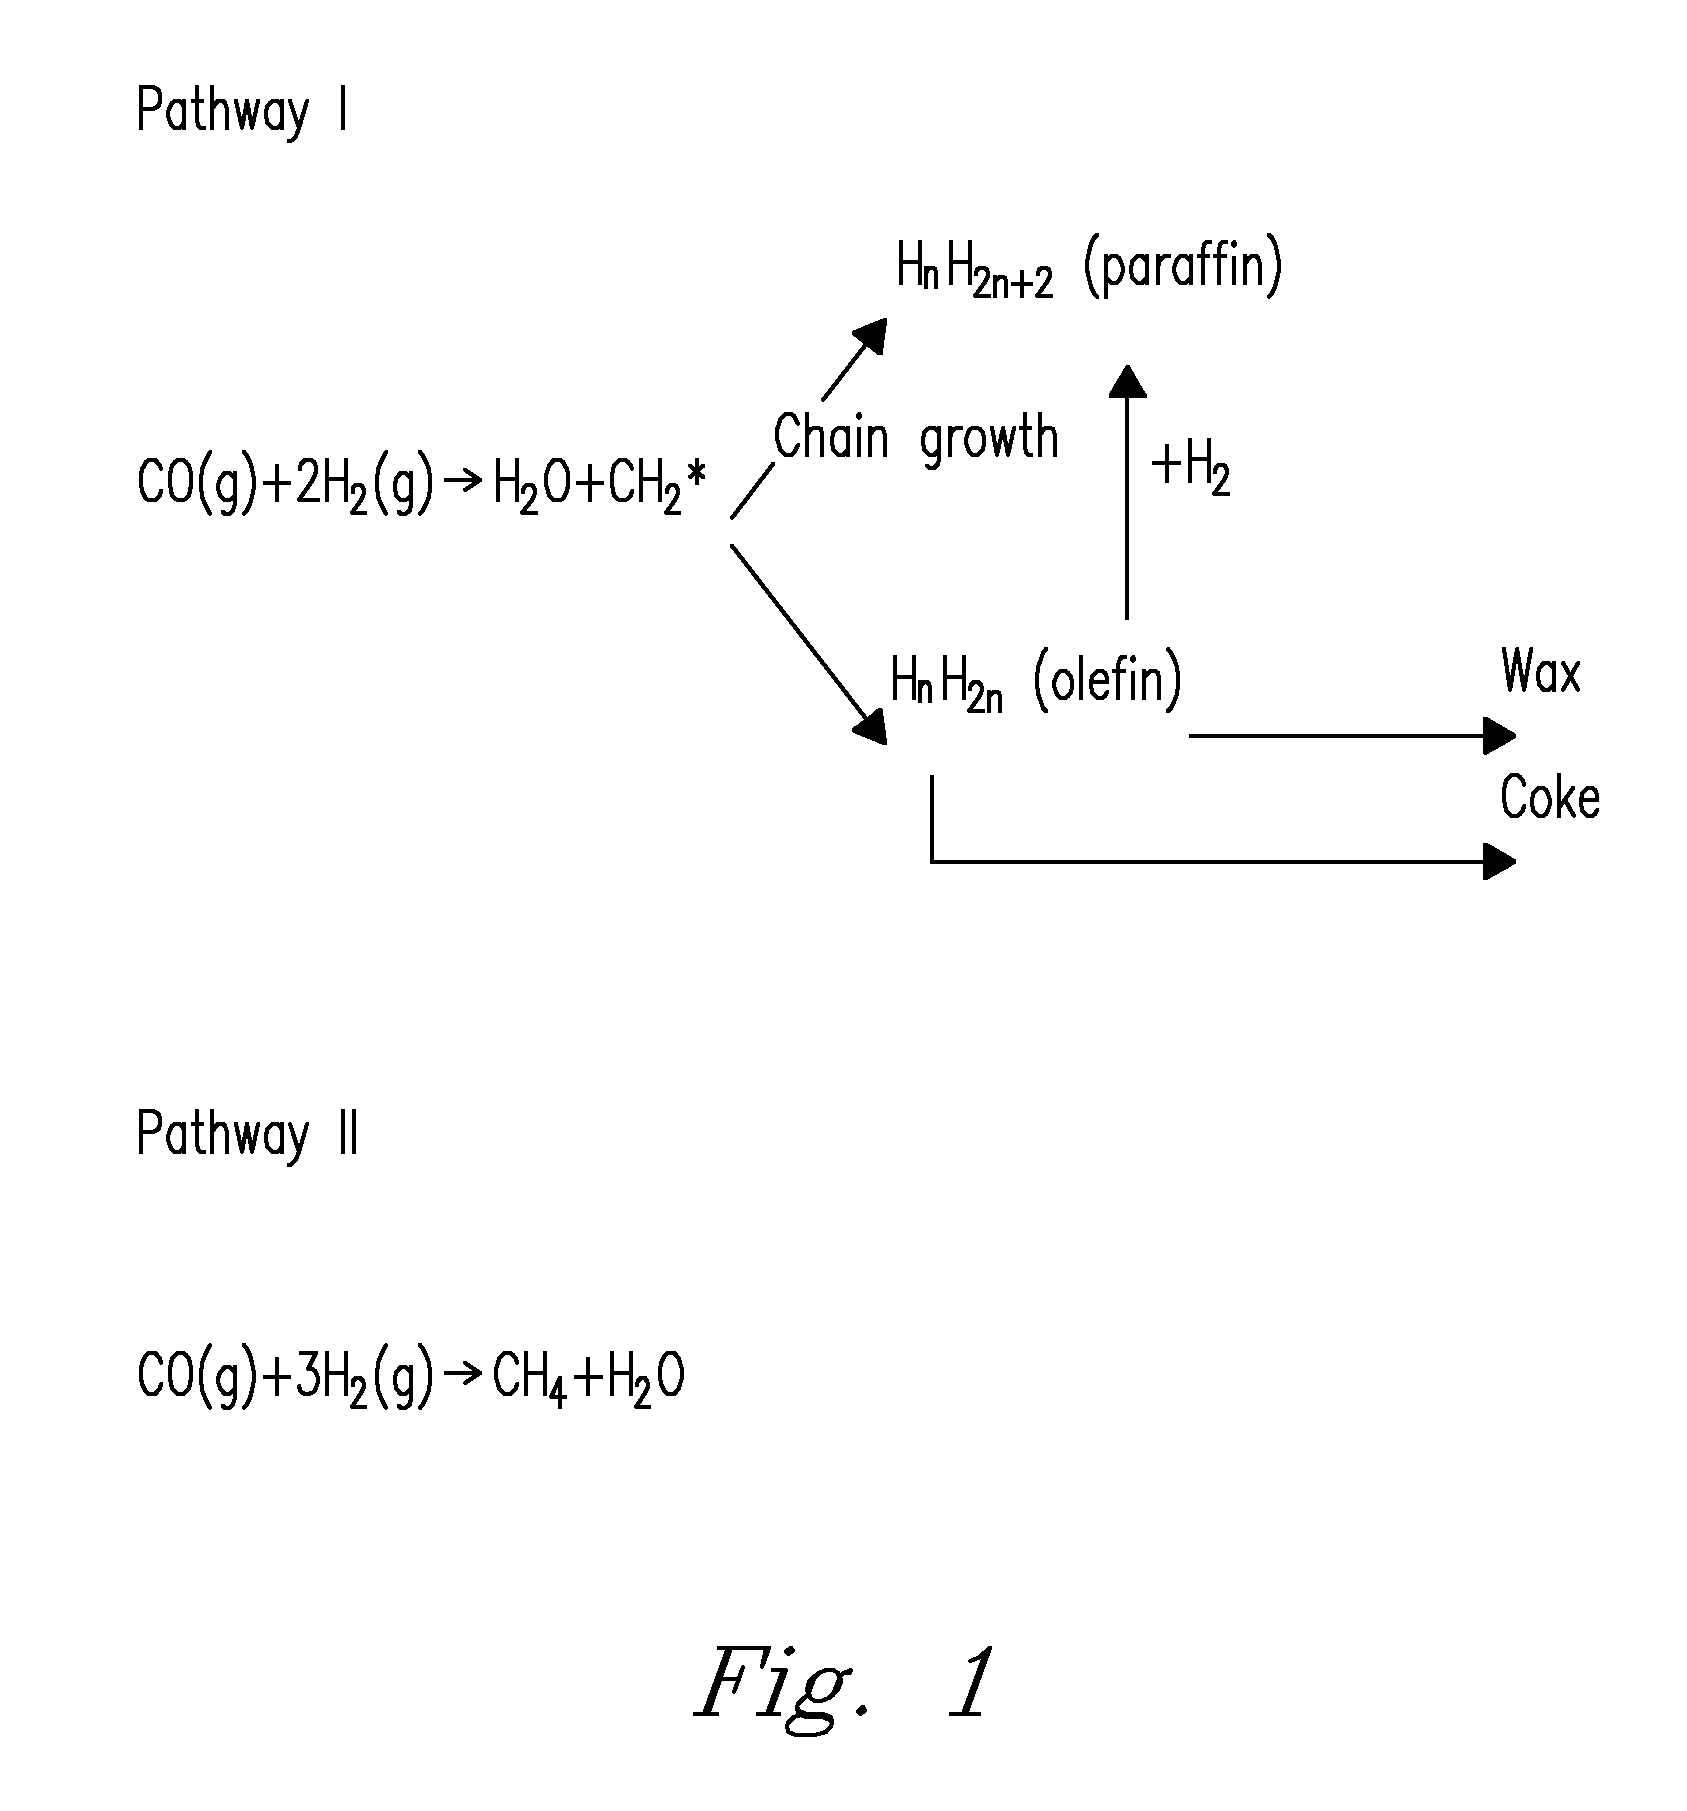 Structured catalyst bed and method for conversion of feed materials to chemical products and liquid fuels